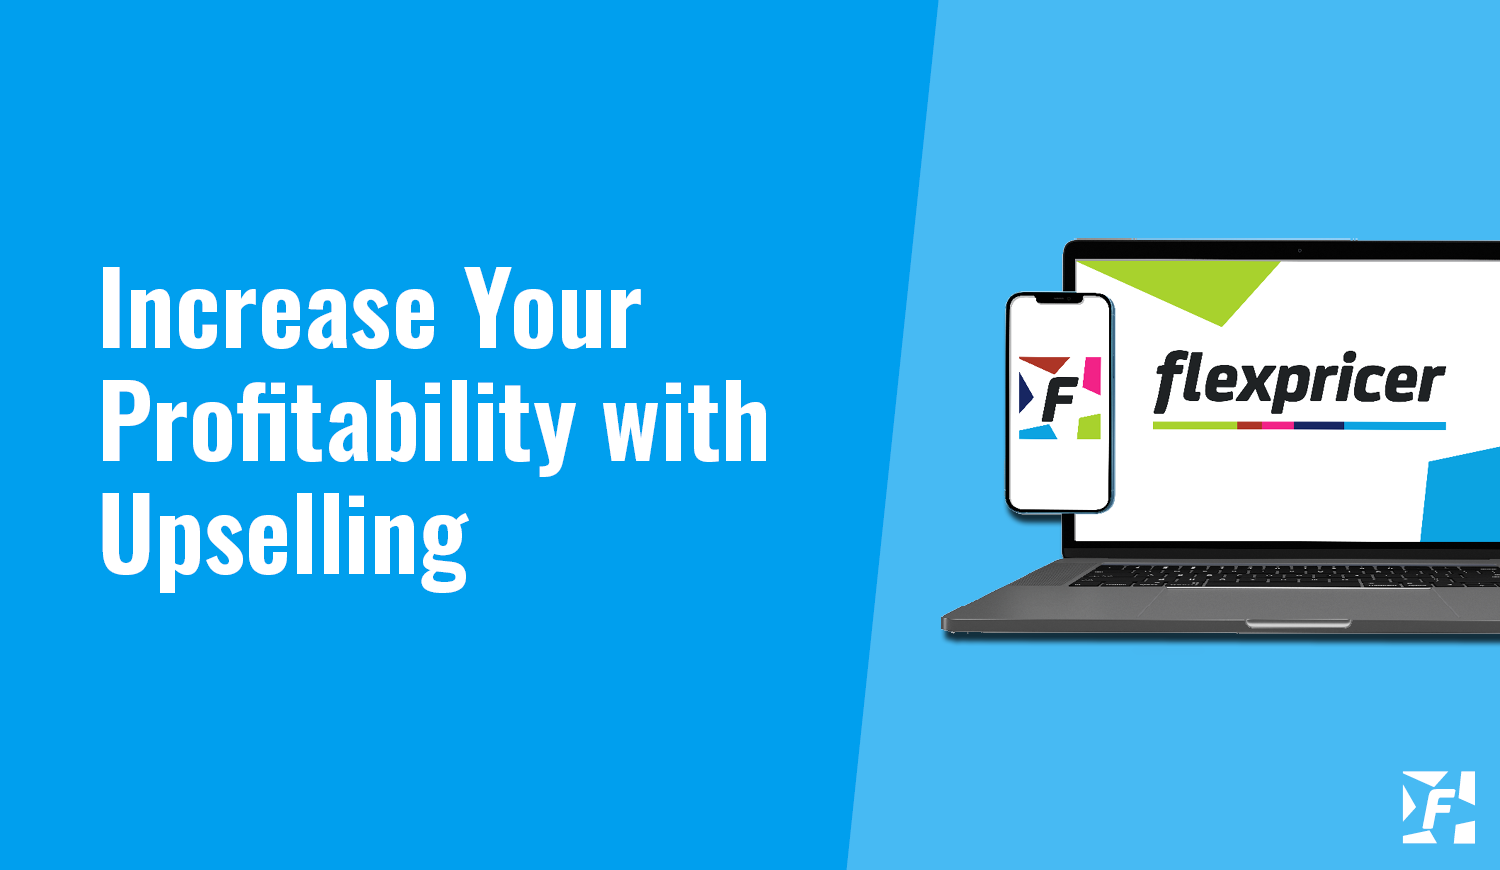 Increase your revenue and profitability with Upselling